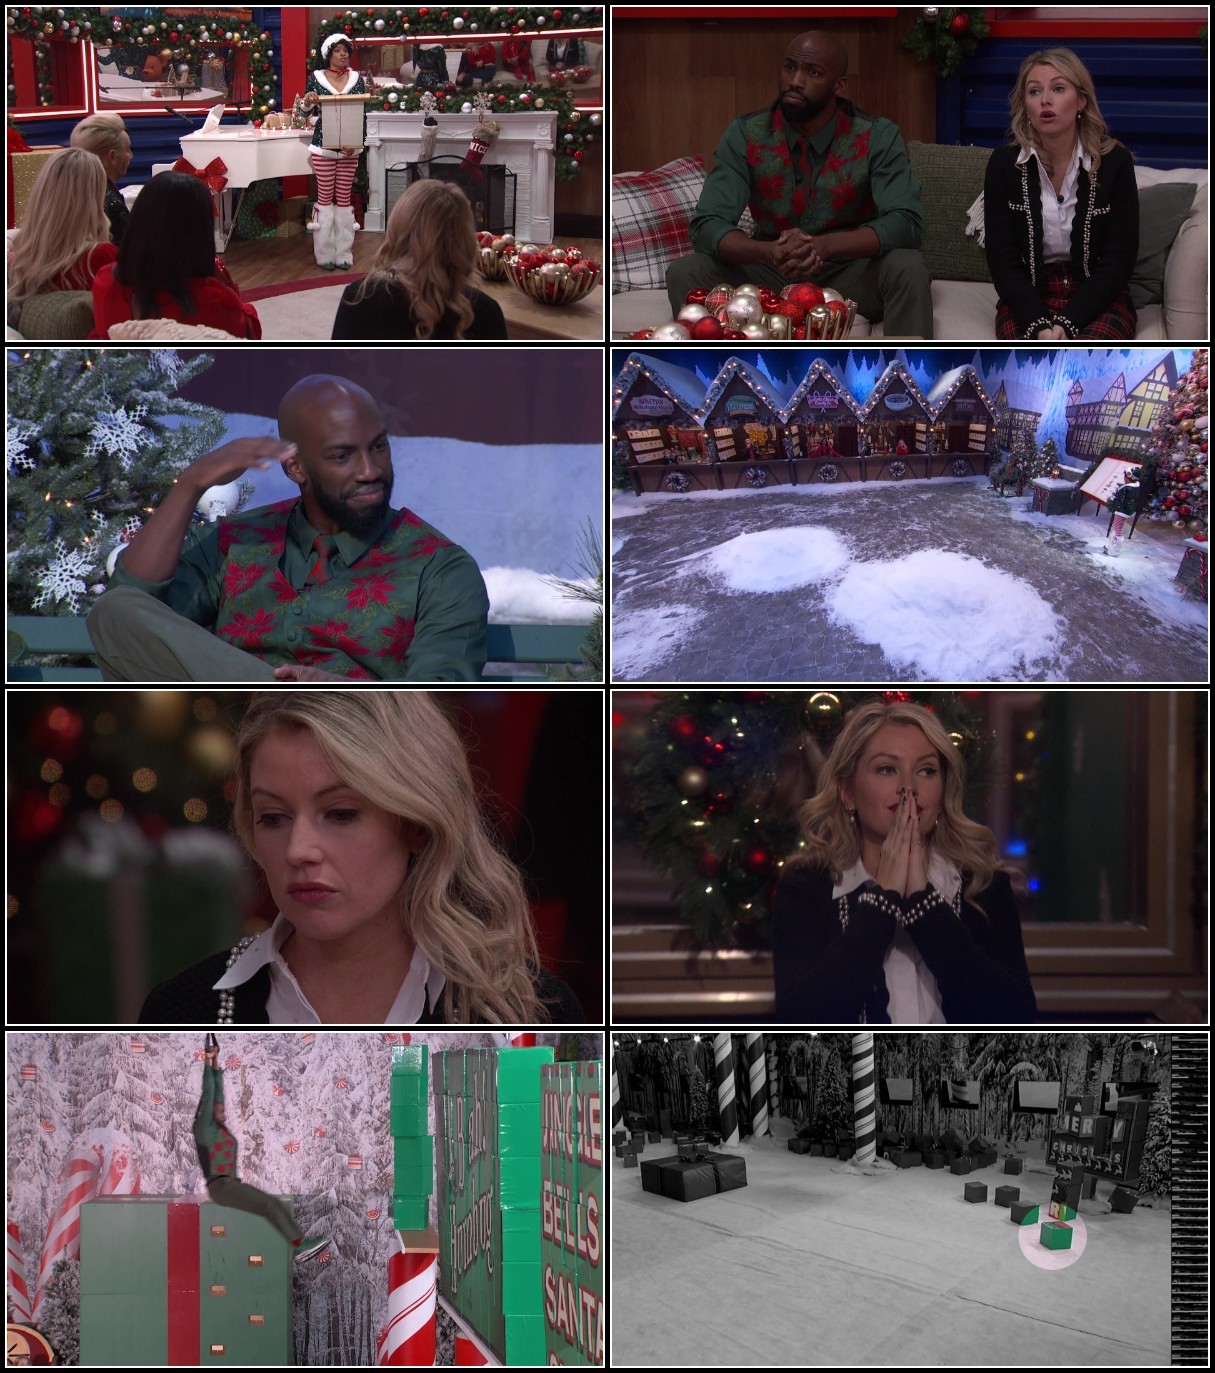 Big BroTher Reindeer Games S01E05 1080p AMZN WEB-DL DDP2 0 H 264-NTb